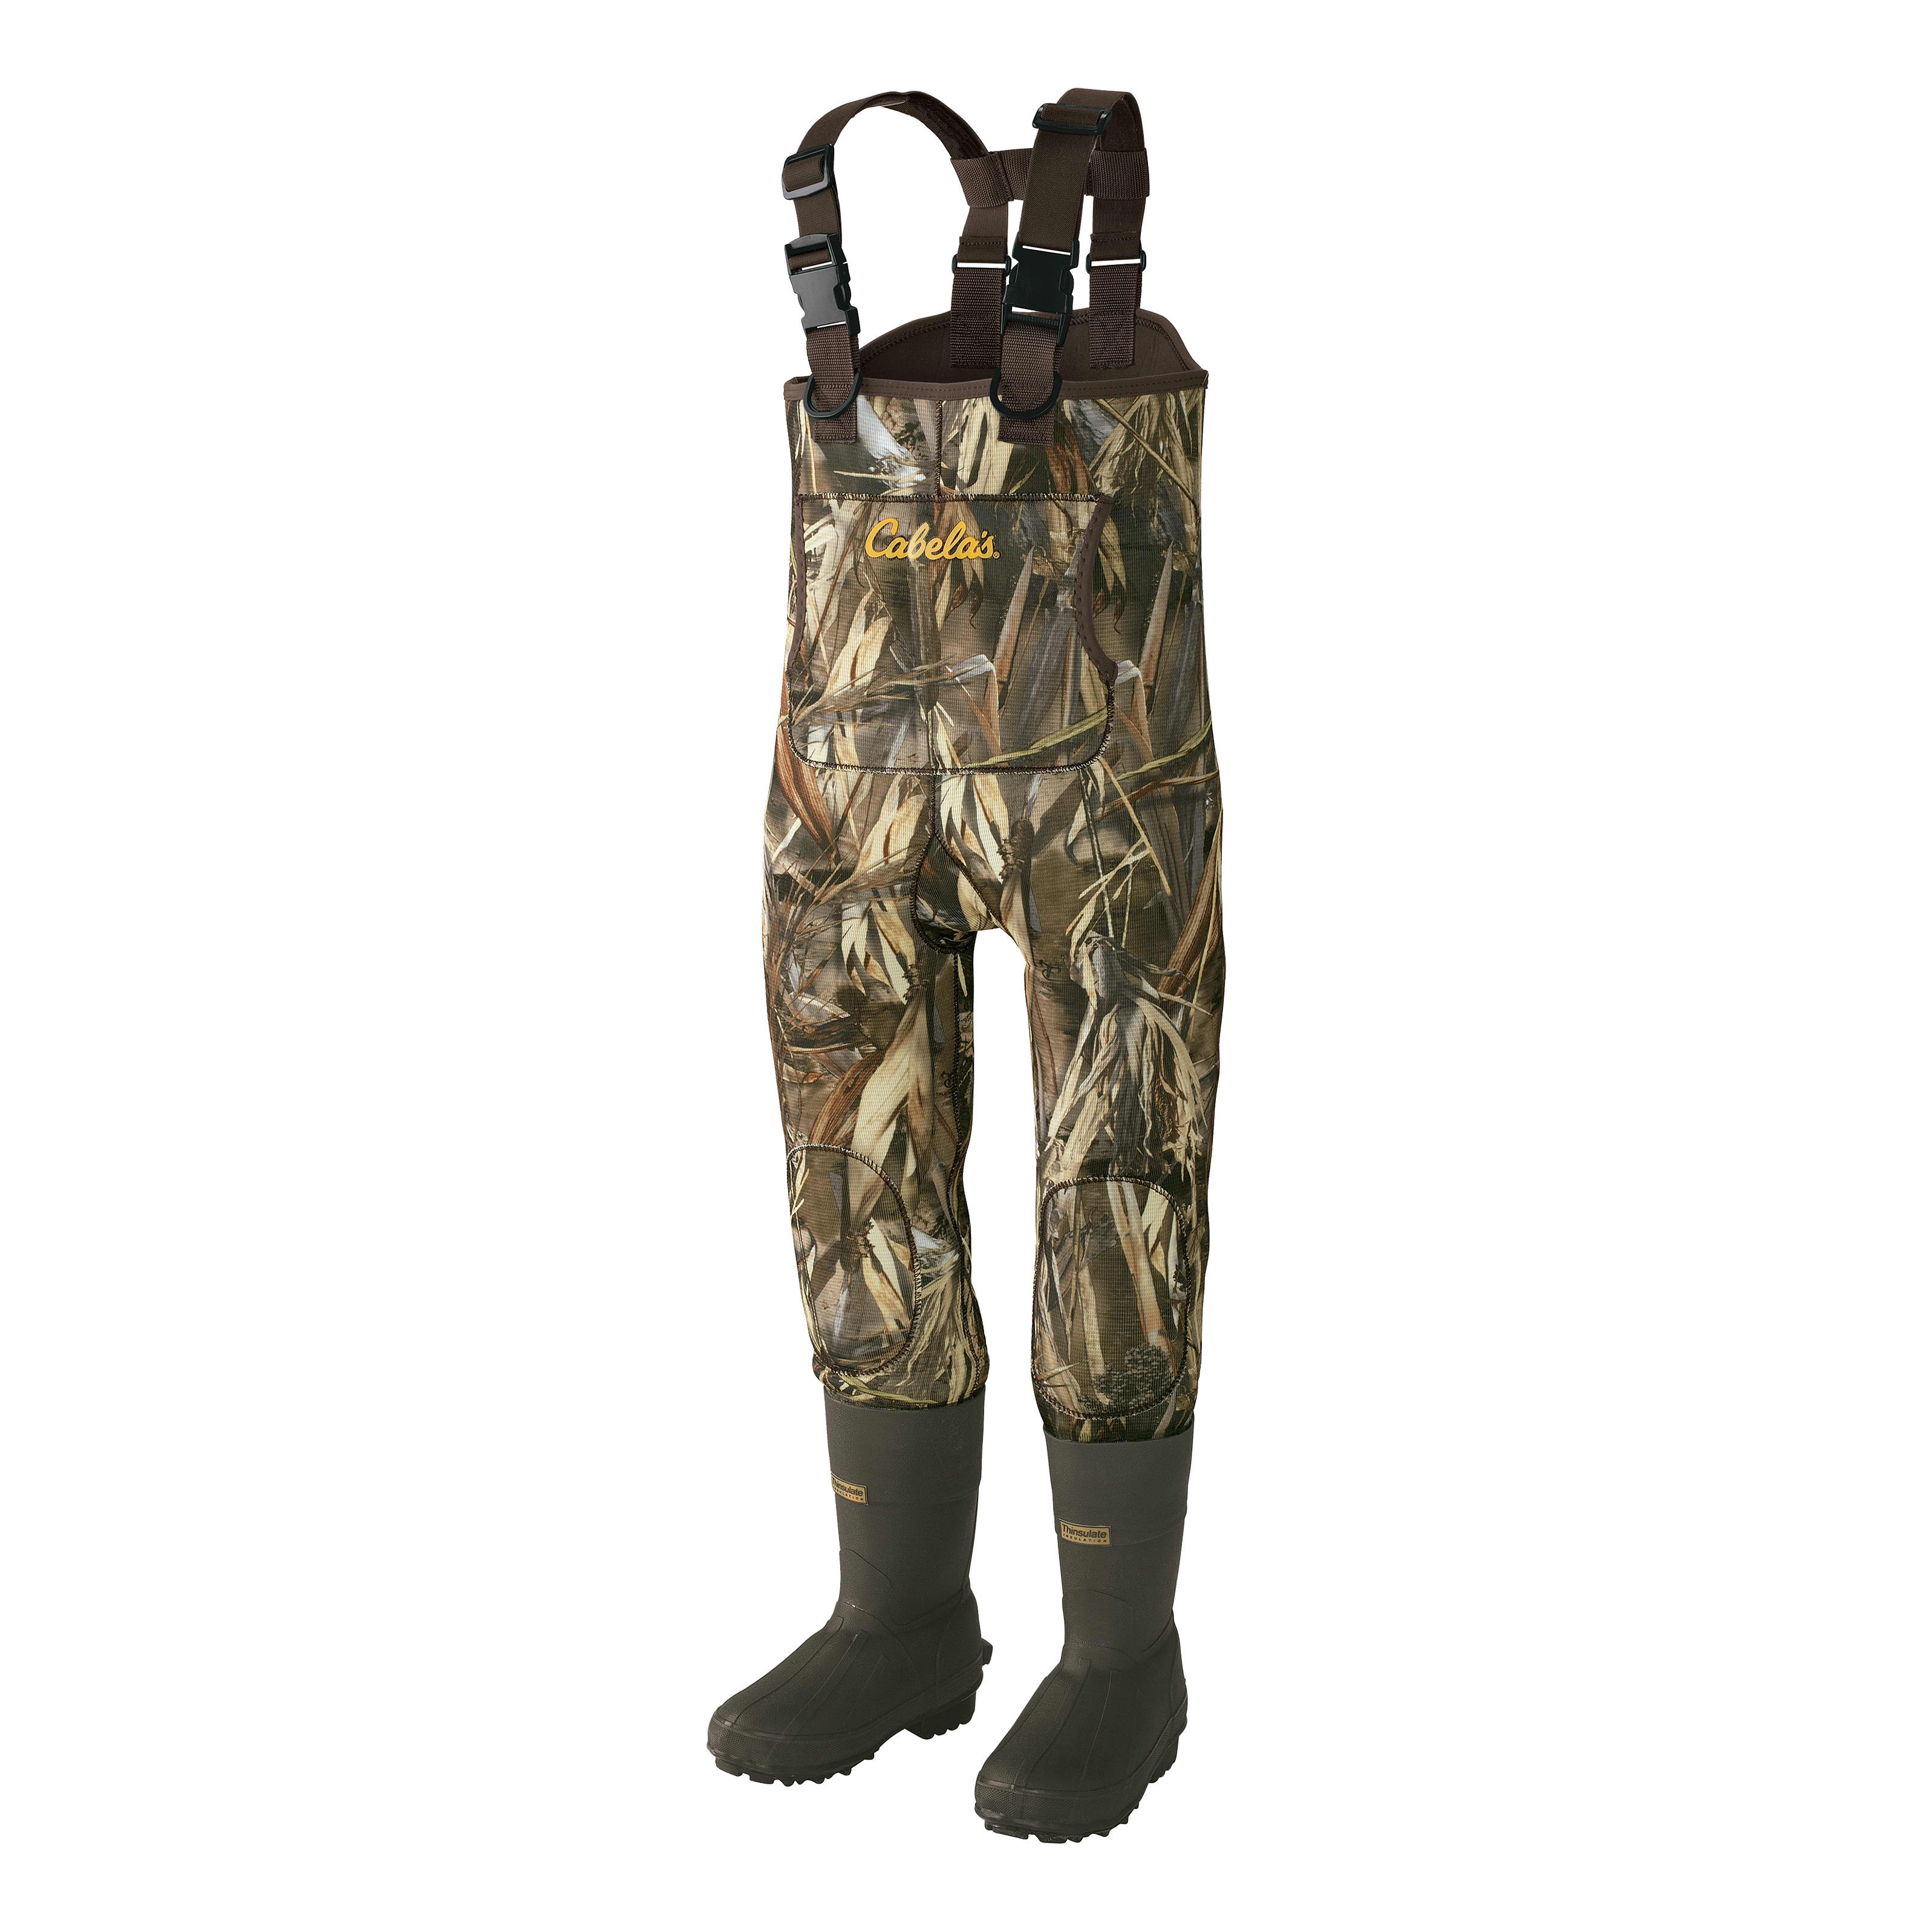  Chest Waders Chest Waders Waterproof Youth Waist Waders with Boots  Fishing Hunting Overalls Waders for Men Women (Color : Black 1, Size : 38)  : Sports & Outdoors